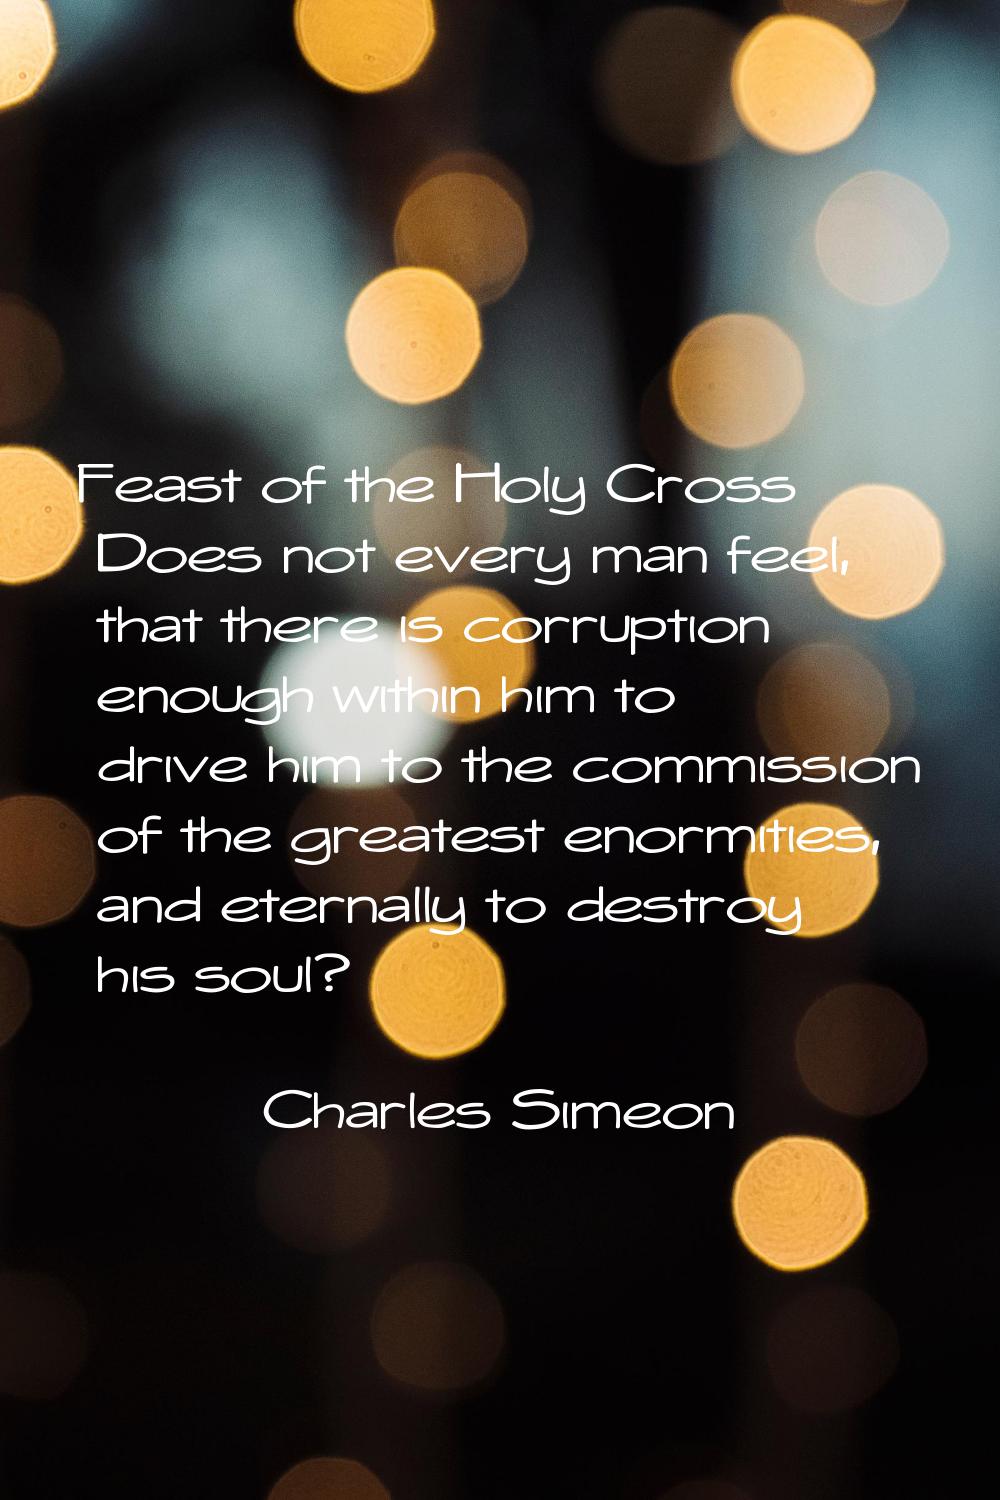 Feast of the Holy Cross Does not every man feel, that there is corruption enough within him to driv